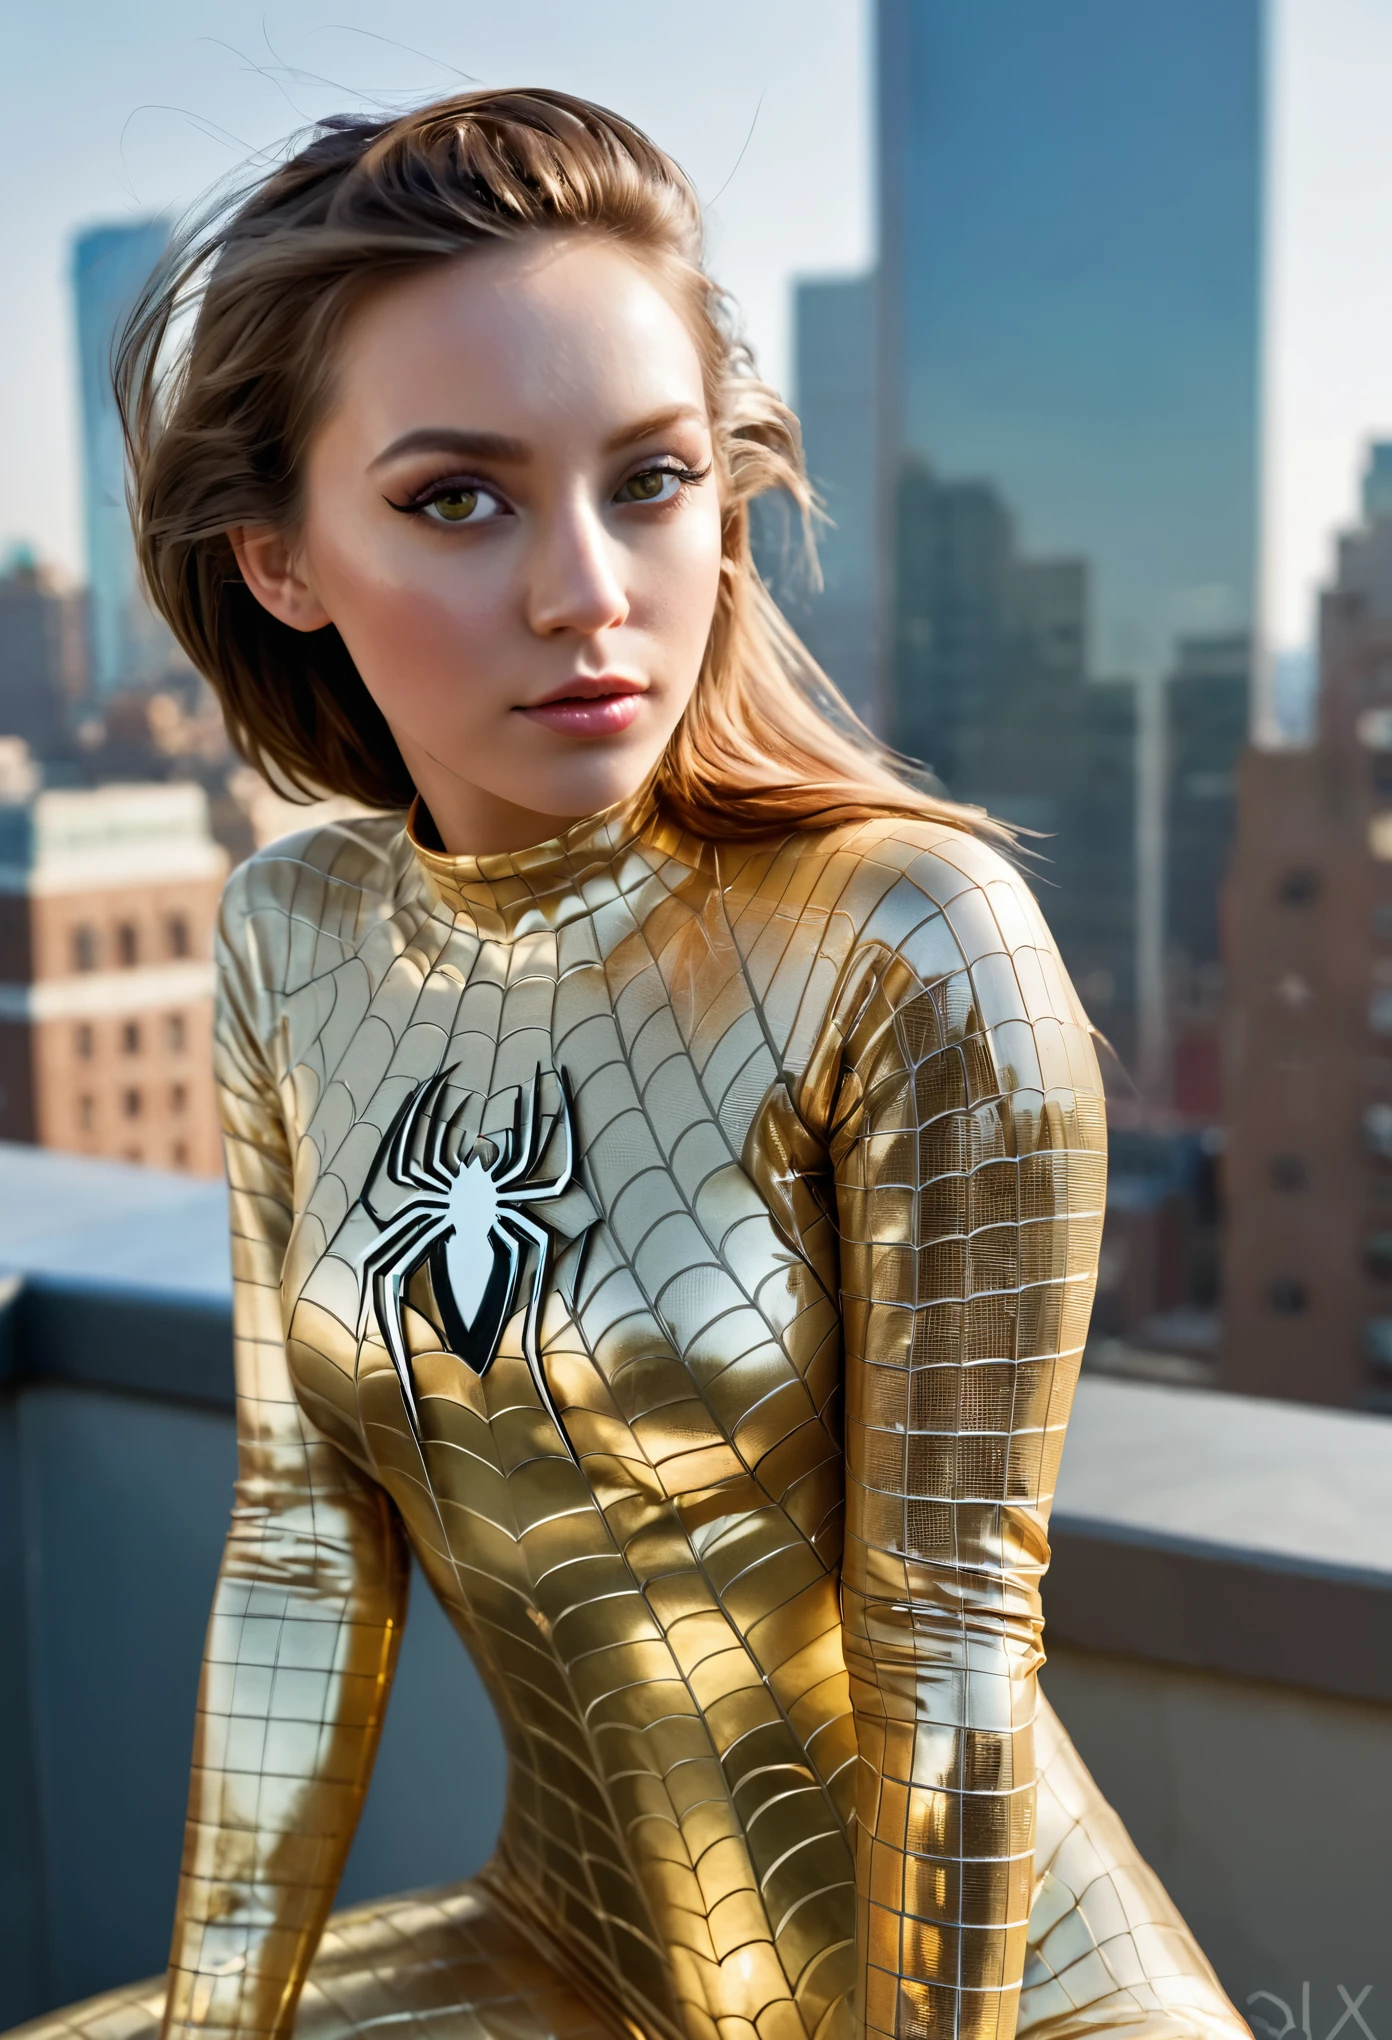 (1girl: 1.3)a beautiful woman, dressed in the golden spiderman costume, (((Very detailed face)))), ((Very detailed eyes and face)))), Beautiful detailed eyes, Body parts__, Official art , Unified 8k wallpaper, Super detailed , beautiful and beautiful, beautiful, masterpiece, best quality, original, masterpiece, super fine photo, best quality, super high resolution, realistic realism, sunlight, full body portrait, incredible beauty, dynamic pose, delicate face , vibrant eyes, (from the front), She wears Spider-Man suit, red and black color scheme, spider, very detailed city roof background, roof, overlooking the city, detailed face, detailed complex busy background, messy, beautiful, milky white, highly detailed skin, realistic skin details, visible pores, clear focus, volumetric haze, 8k uhd, DSLR, high quality, film grain, clear skin, photo realism, lomography, futuristic dystopian megalopolis, translucent